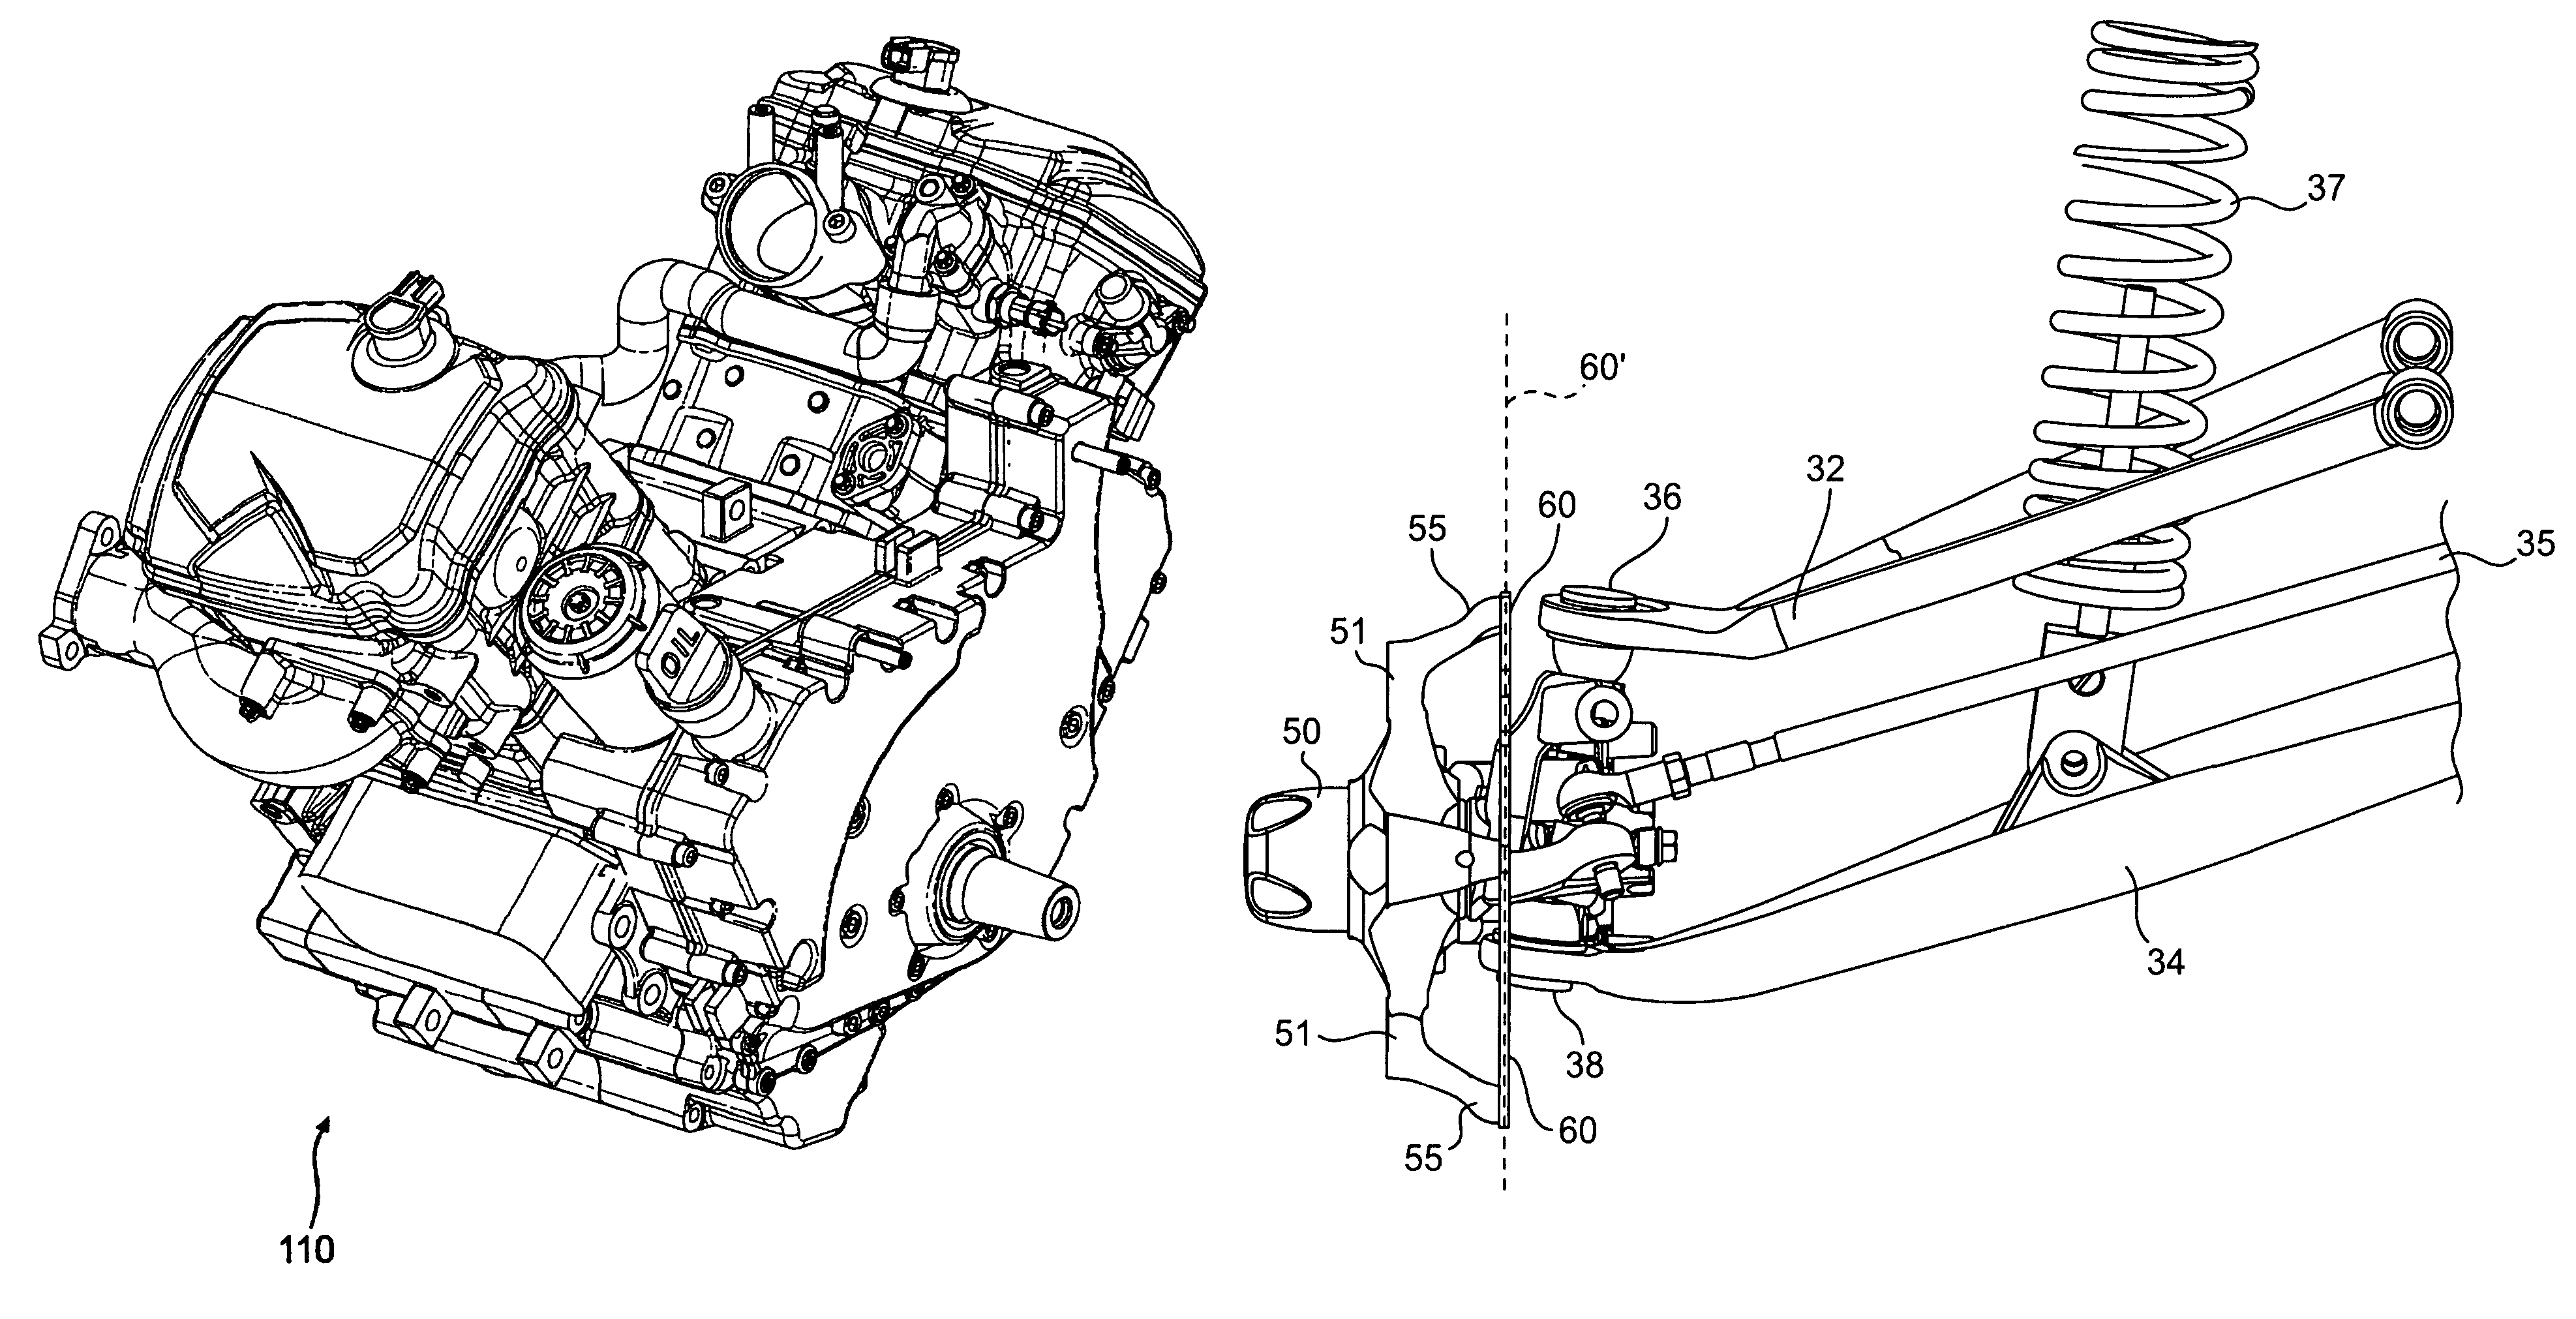 Front drive geometry for an all-terrain vehicle